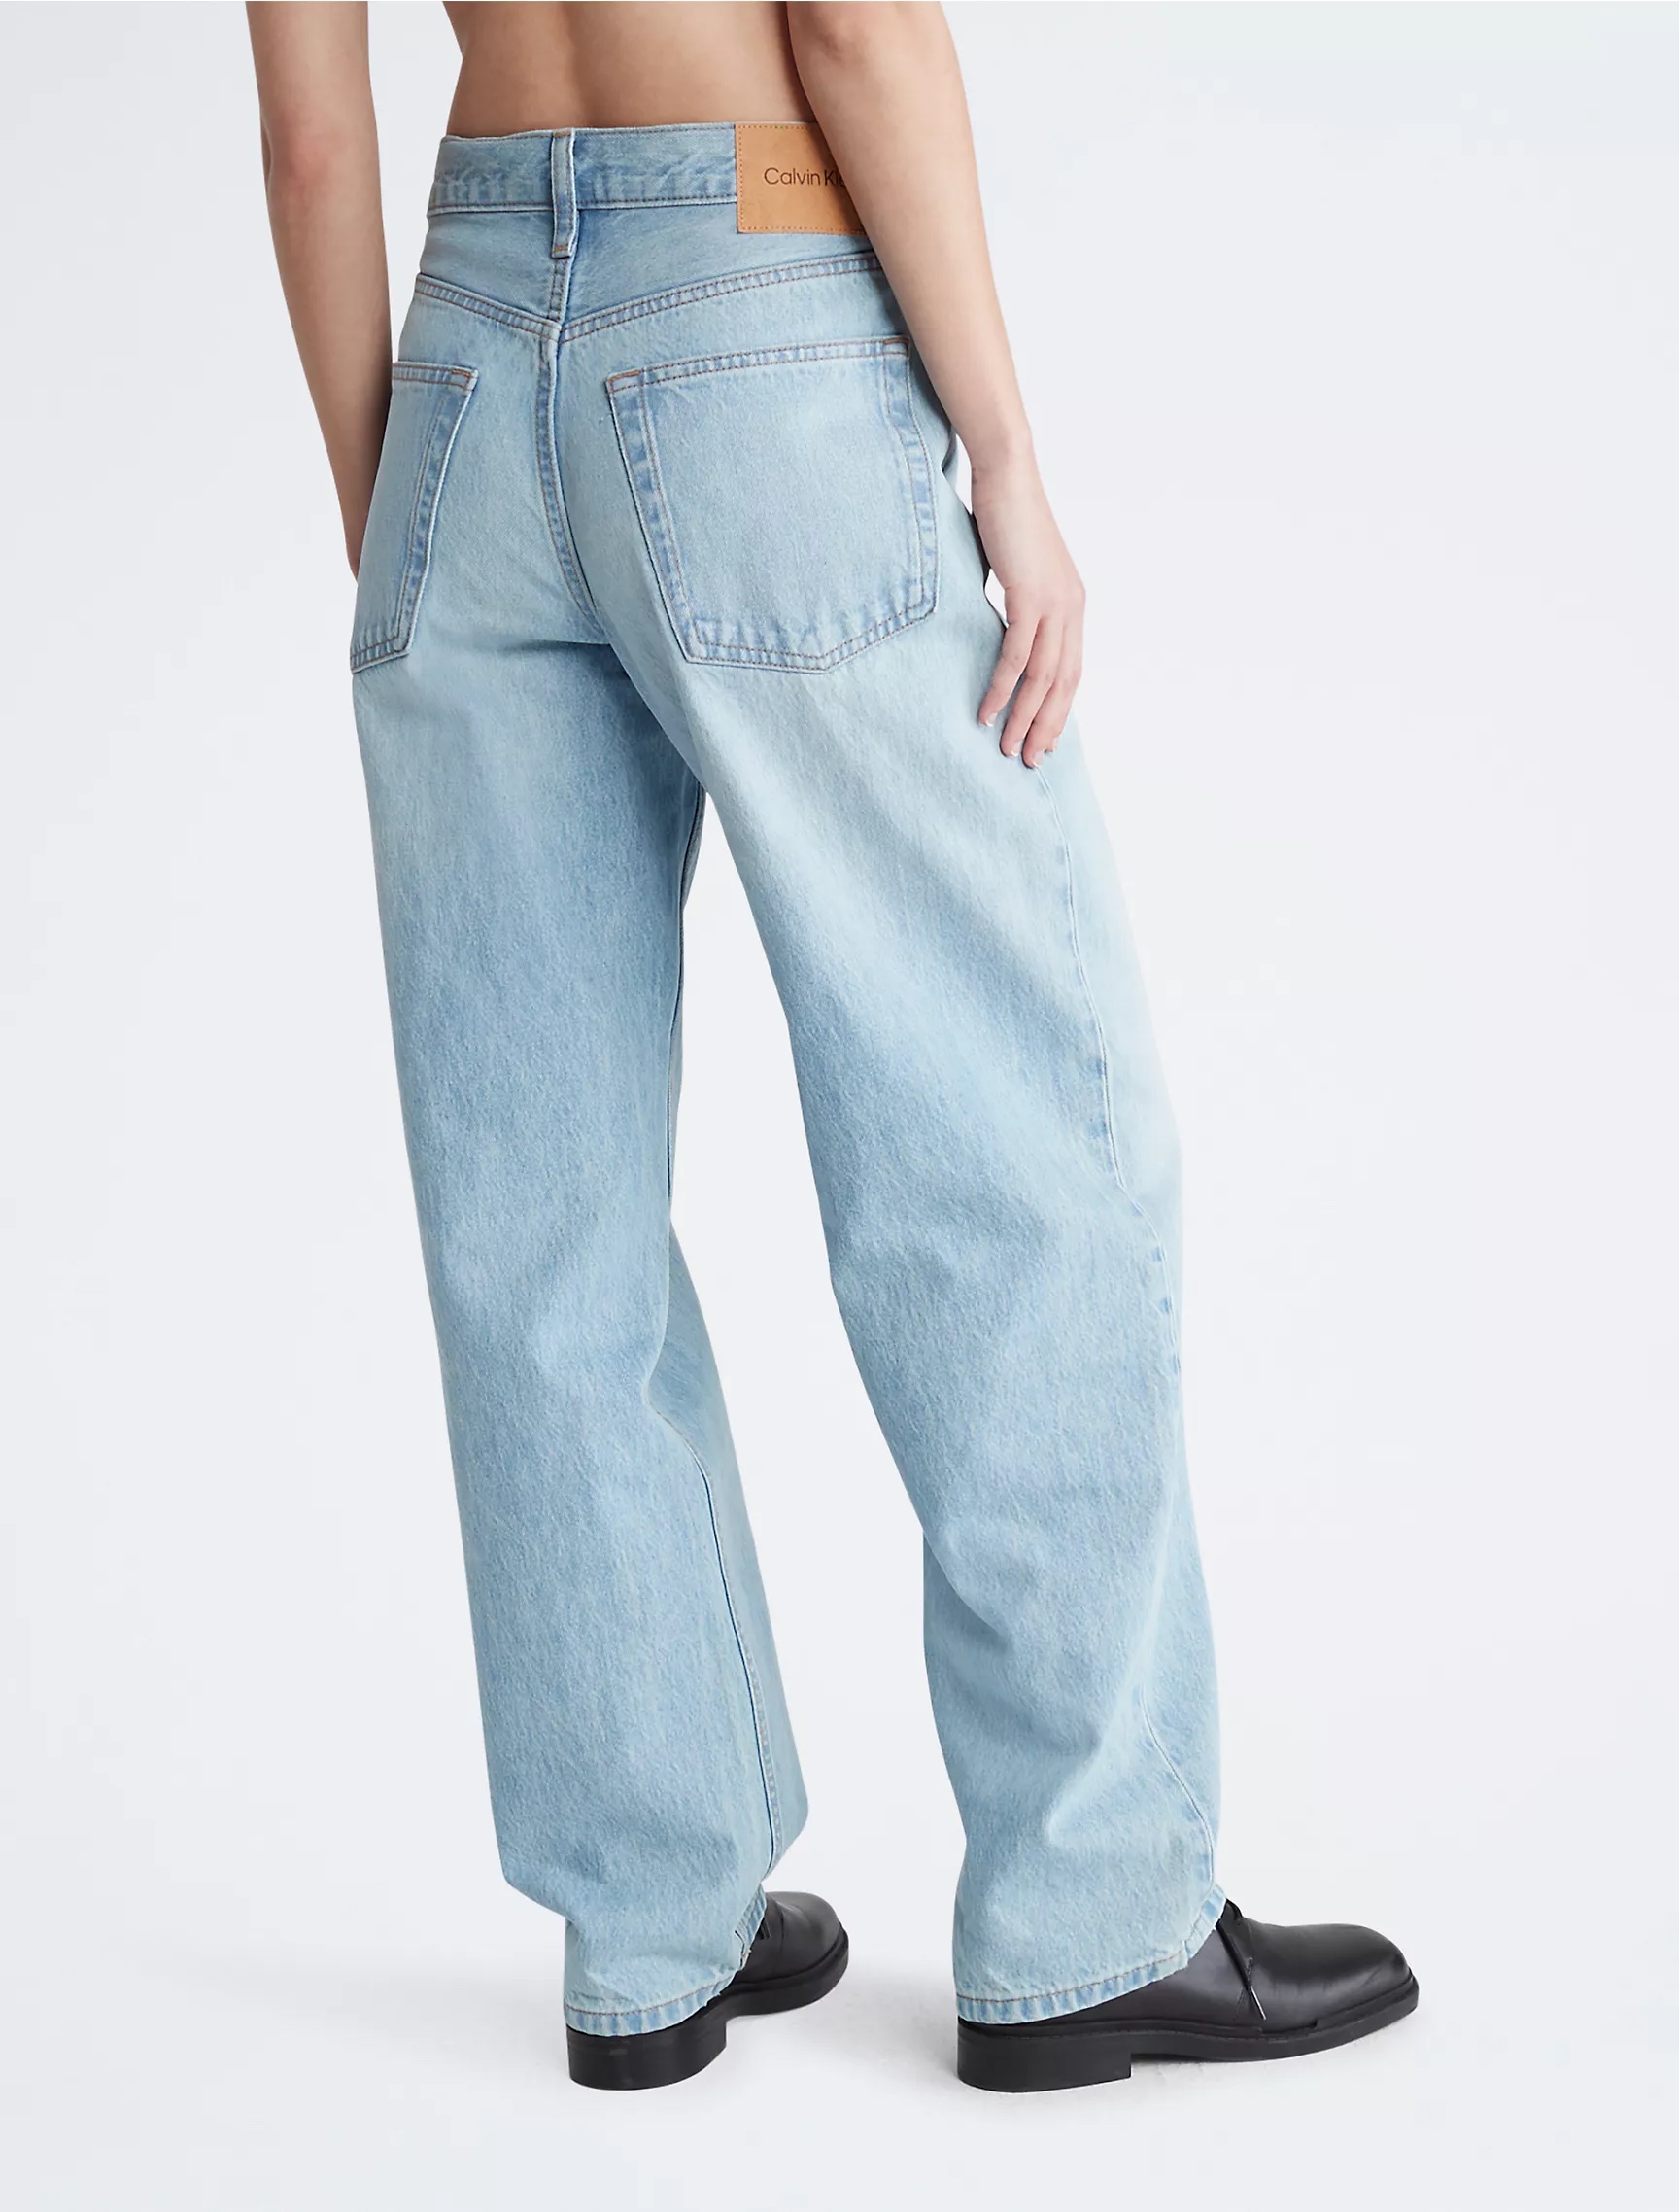 Classic Denim Jeans To Add To Your Cart For Spring